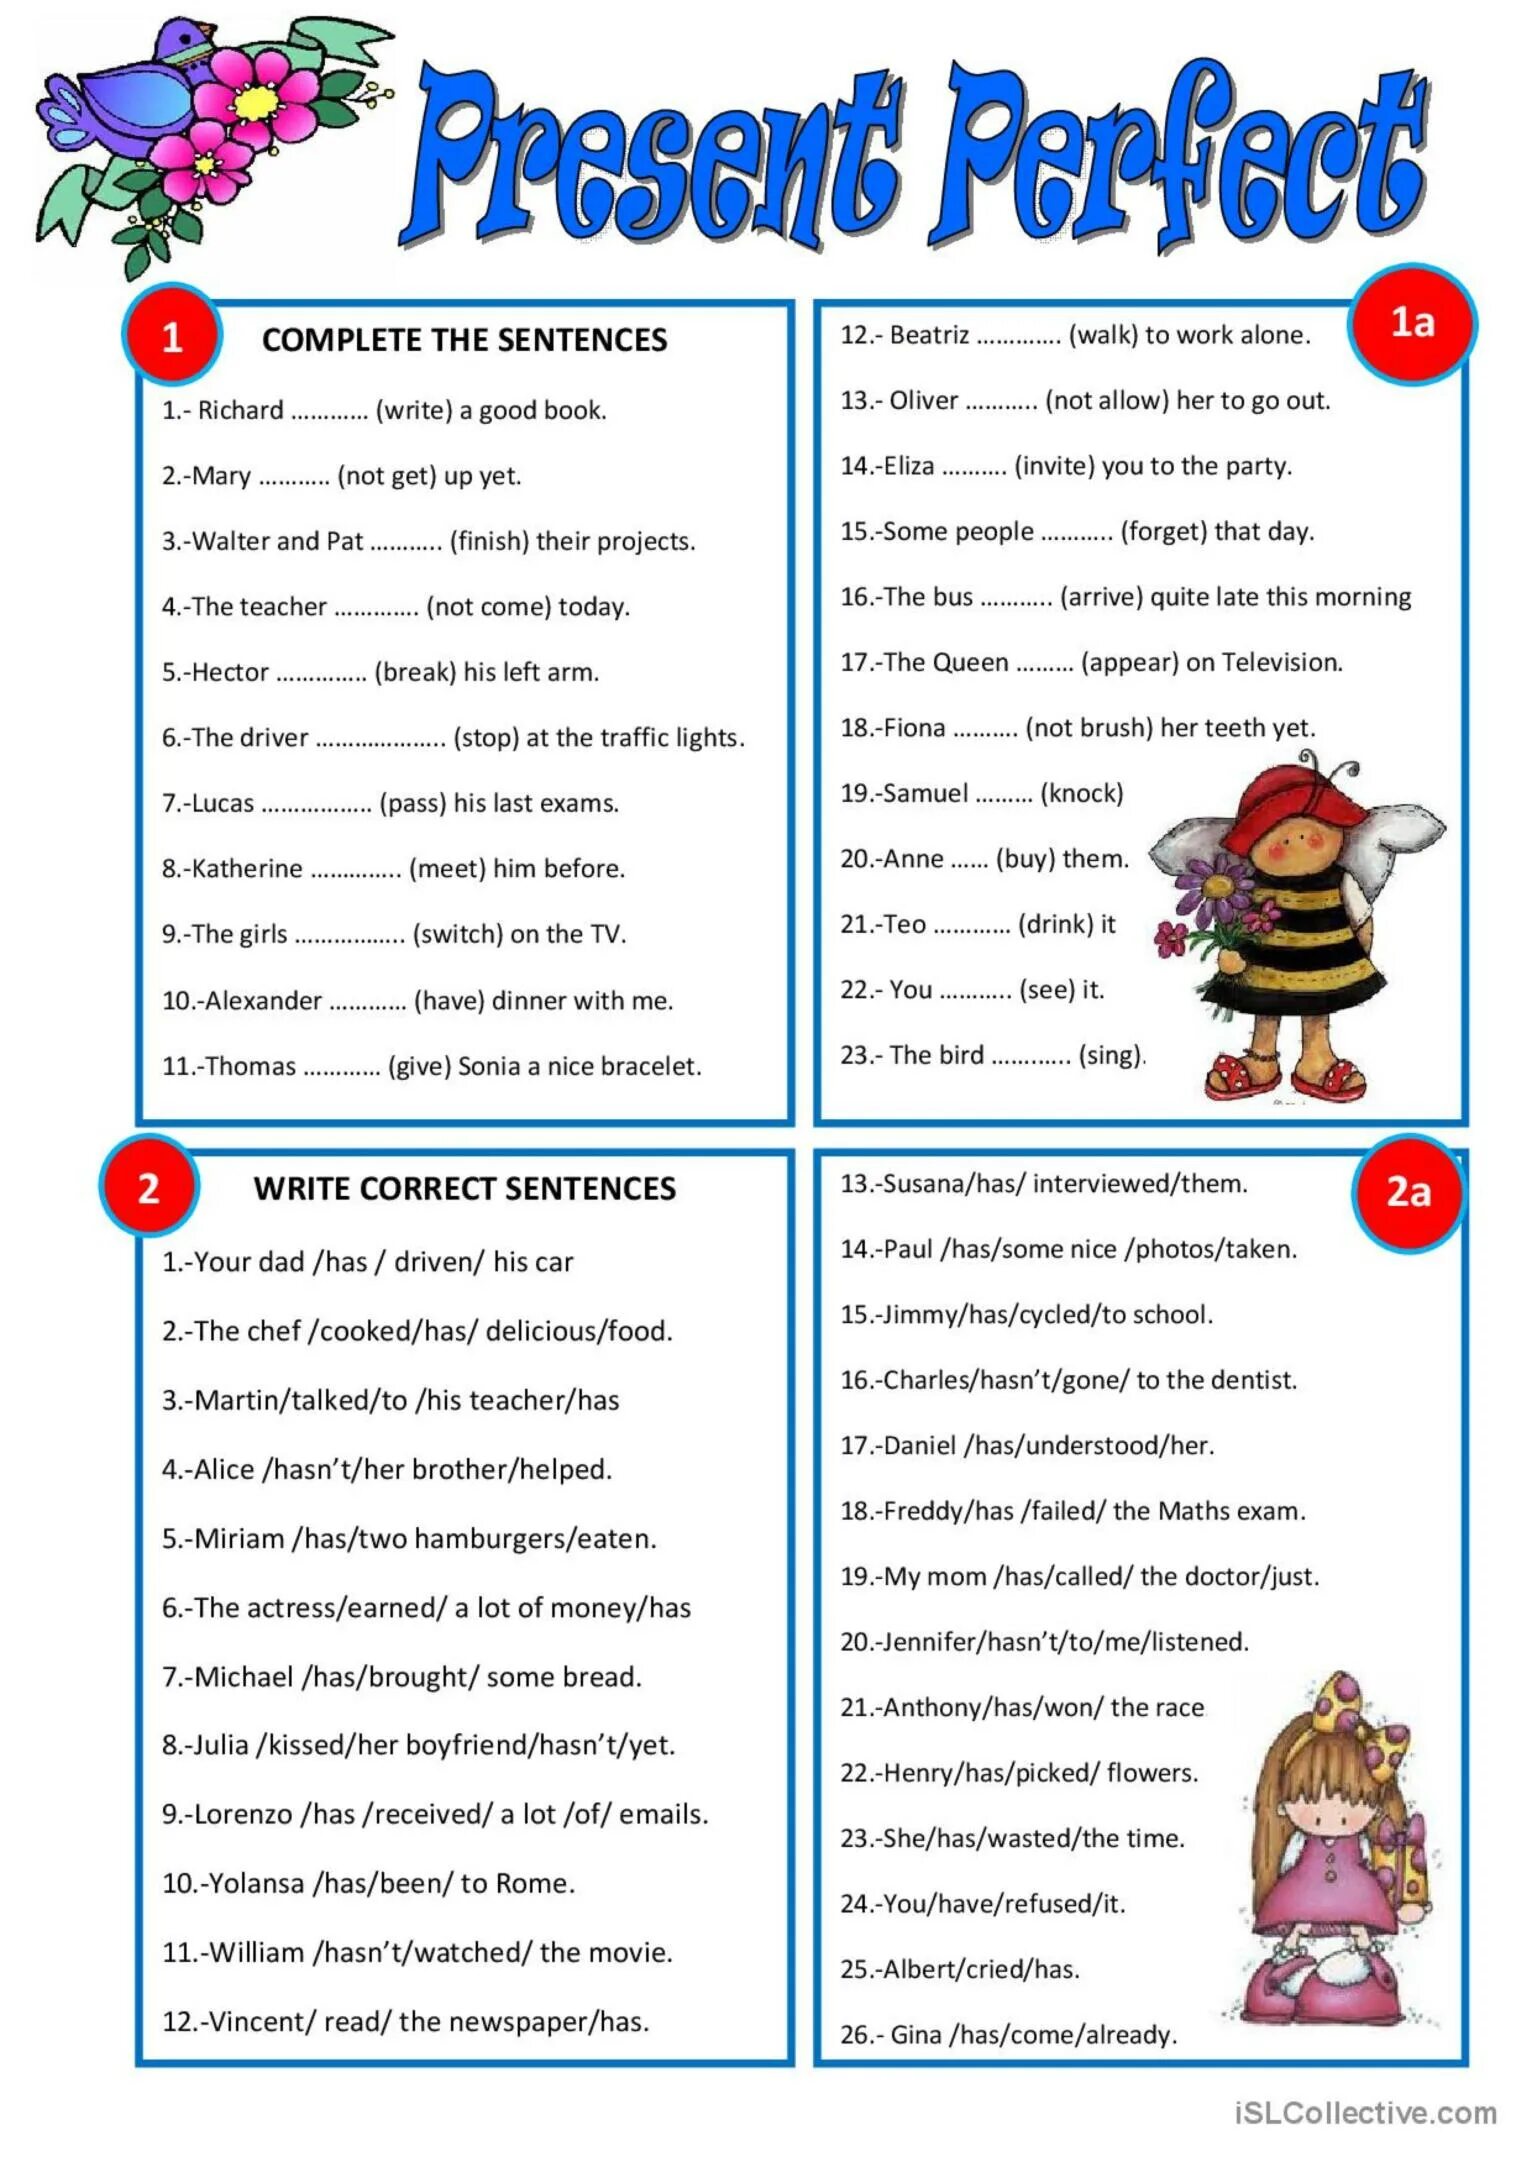 Yet in questions. Present perfect Worksheets 7 класс. Презент Перфект Worksheets. Present perfect упражнения Worksheets. Present perfect Worksheets 6 класс.